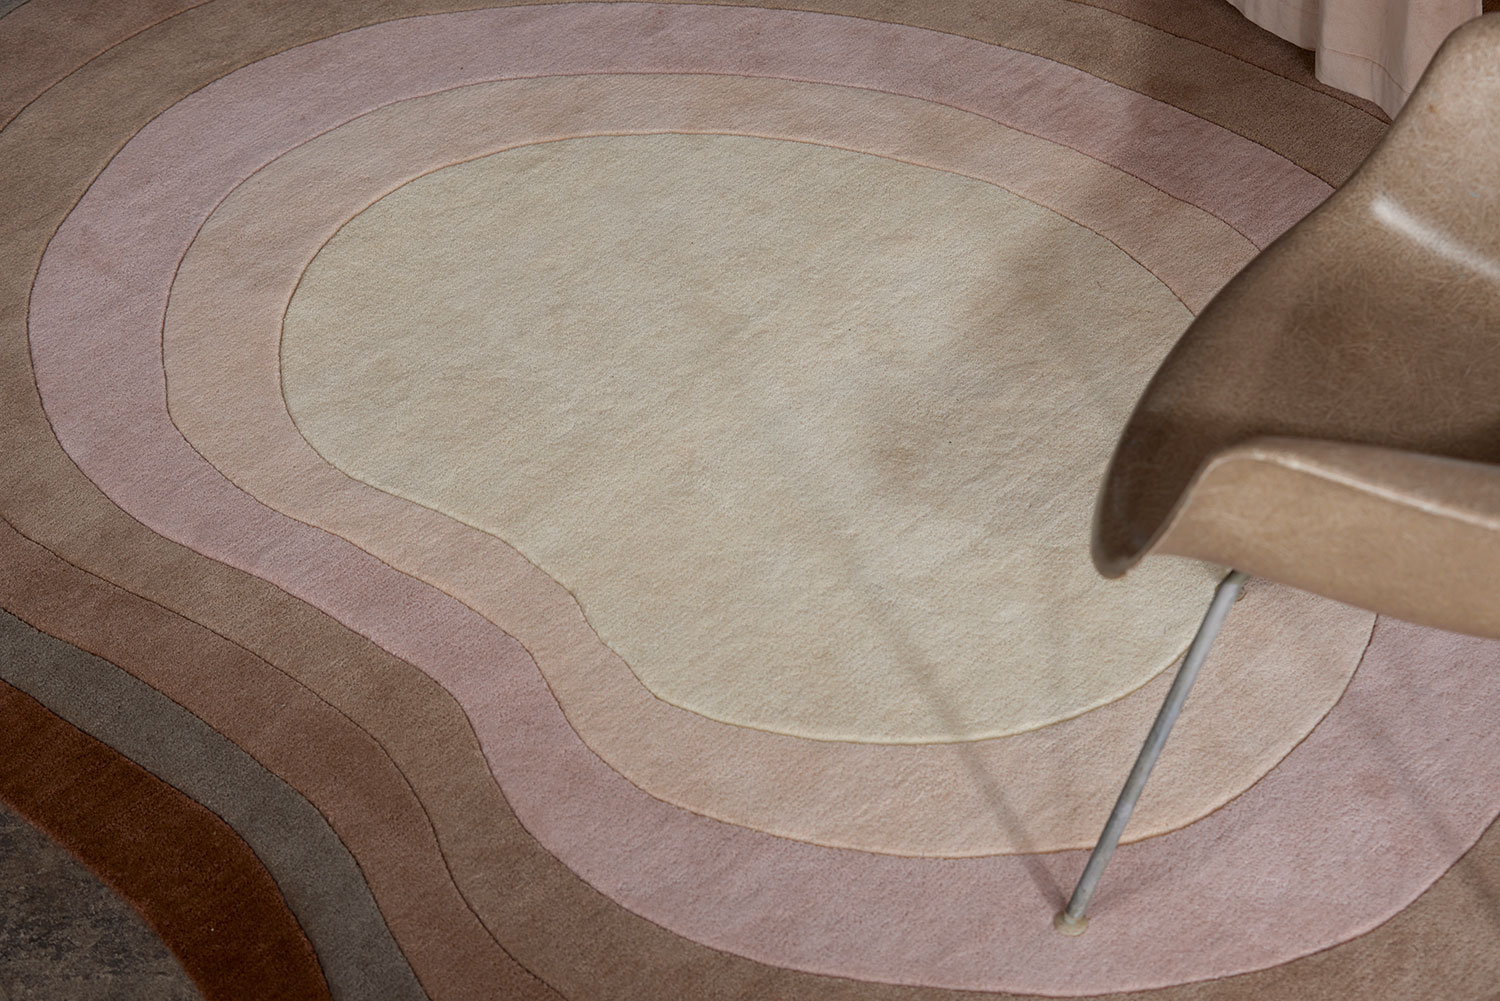 A chair sits on a neutral gradient area rug called Pool Heaven in the shape of a pool